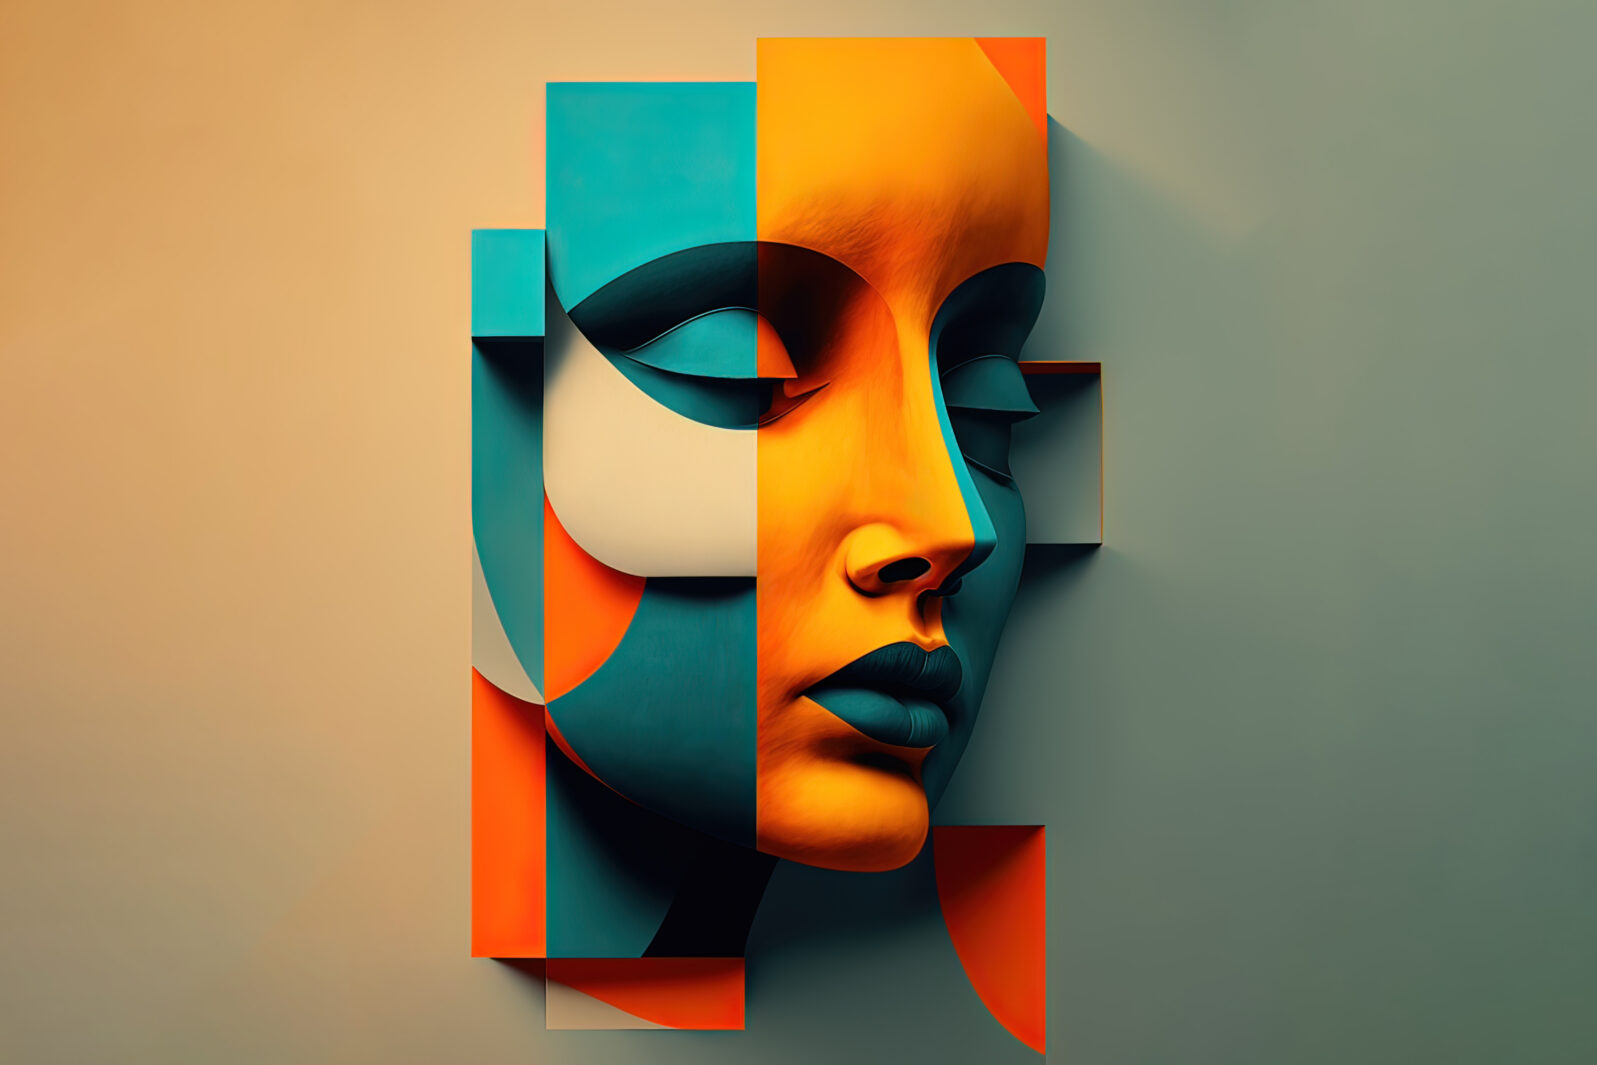 Generative AI. Abstract face portrait as a cubism art. Concept of creative shapes graphics with textured geometric shapes. Geometric face.